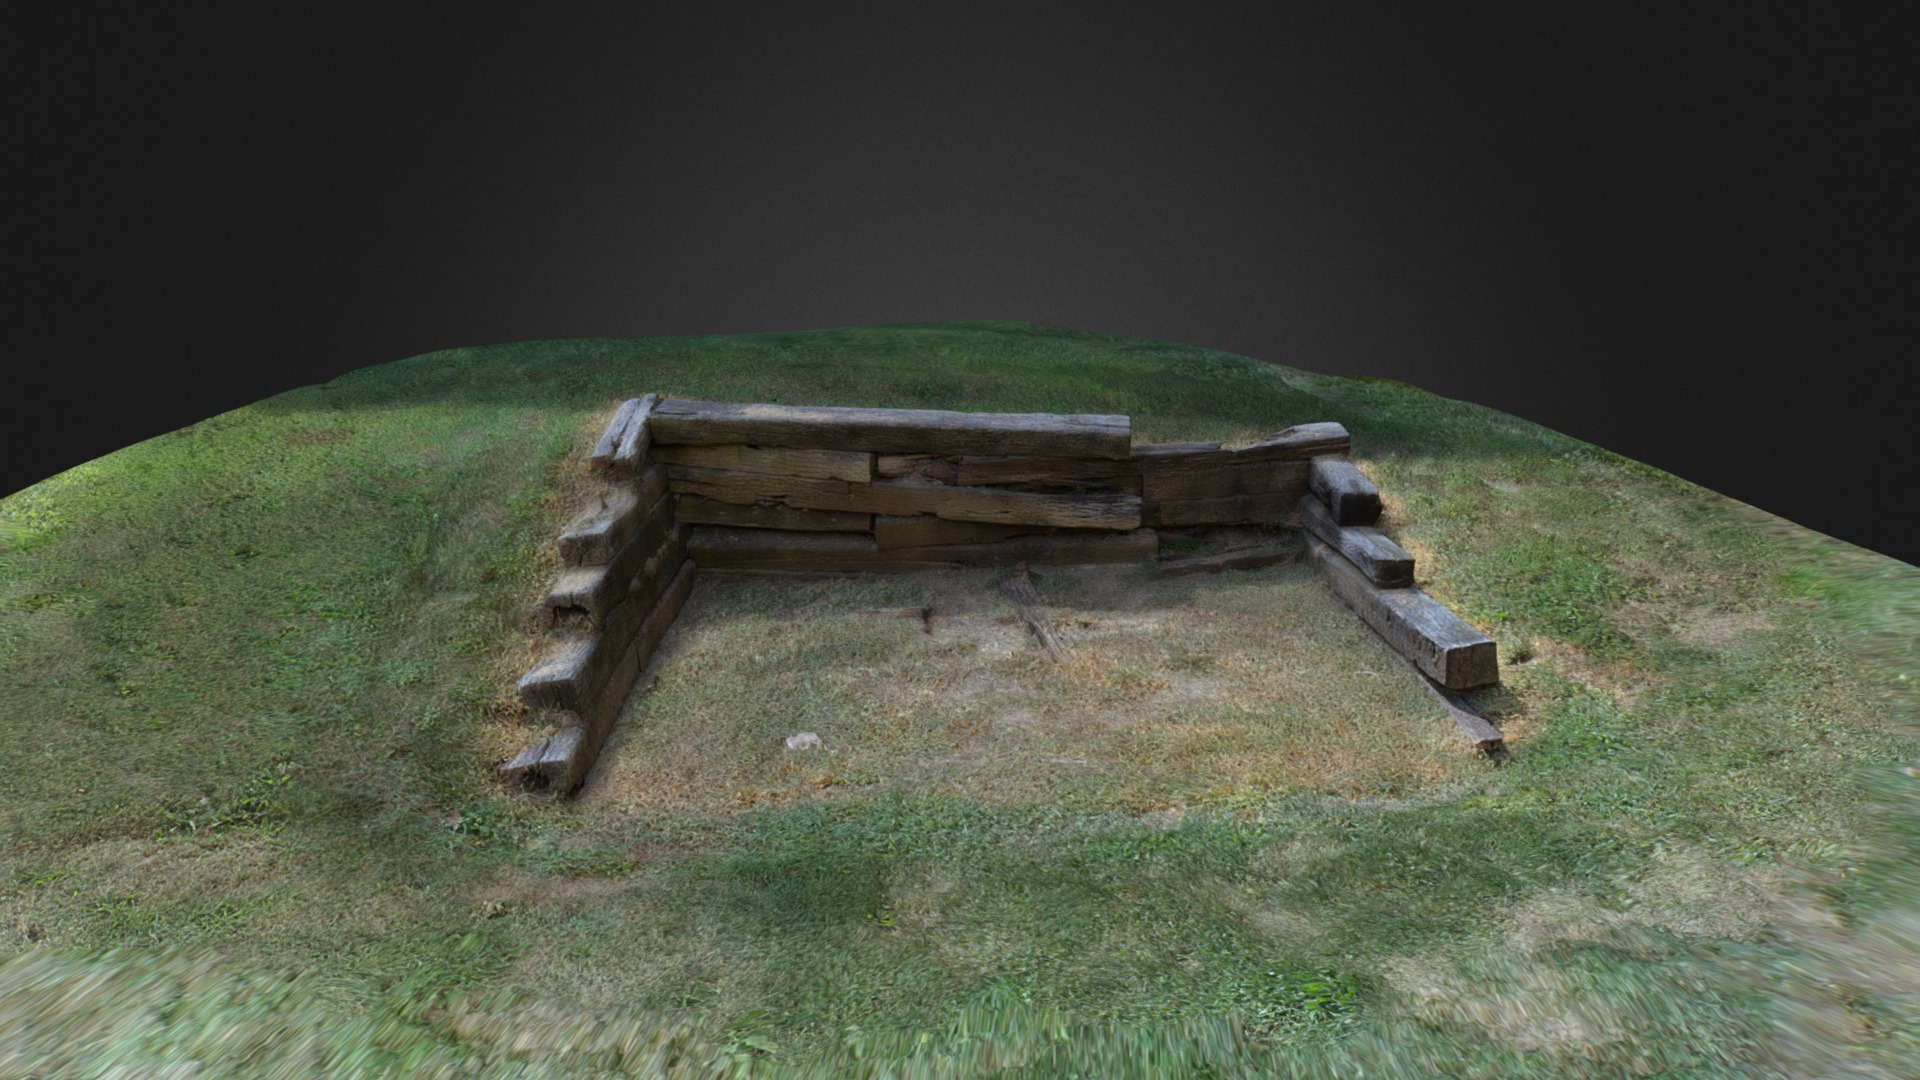 3D model Wood and earth structure - This is a 3D model of the Wood and earth structure. The 3D model is about a wooden bench in a grassy area.